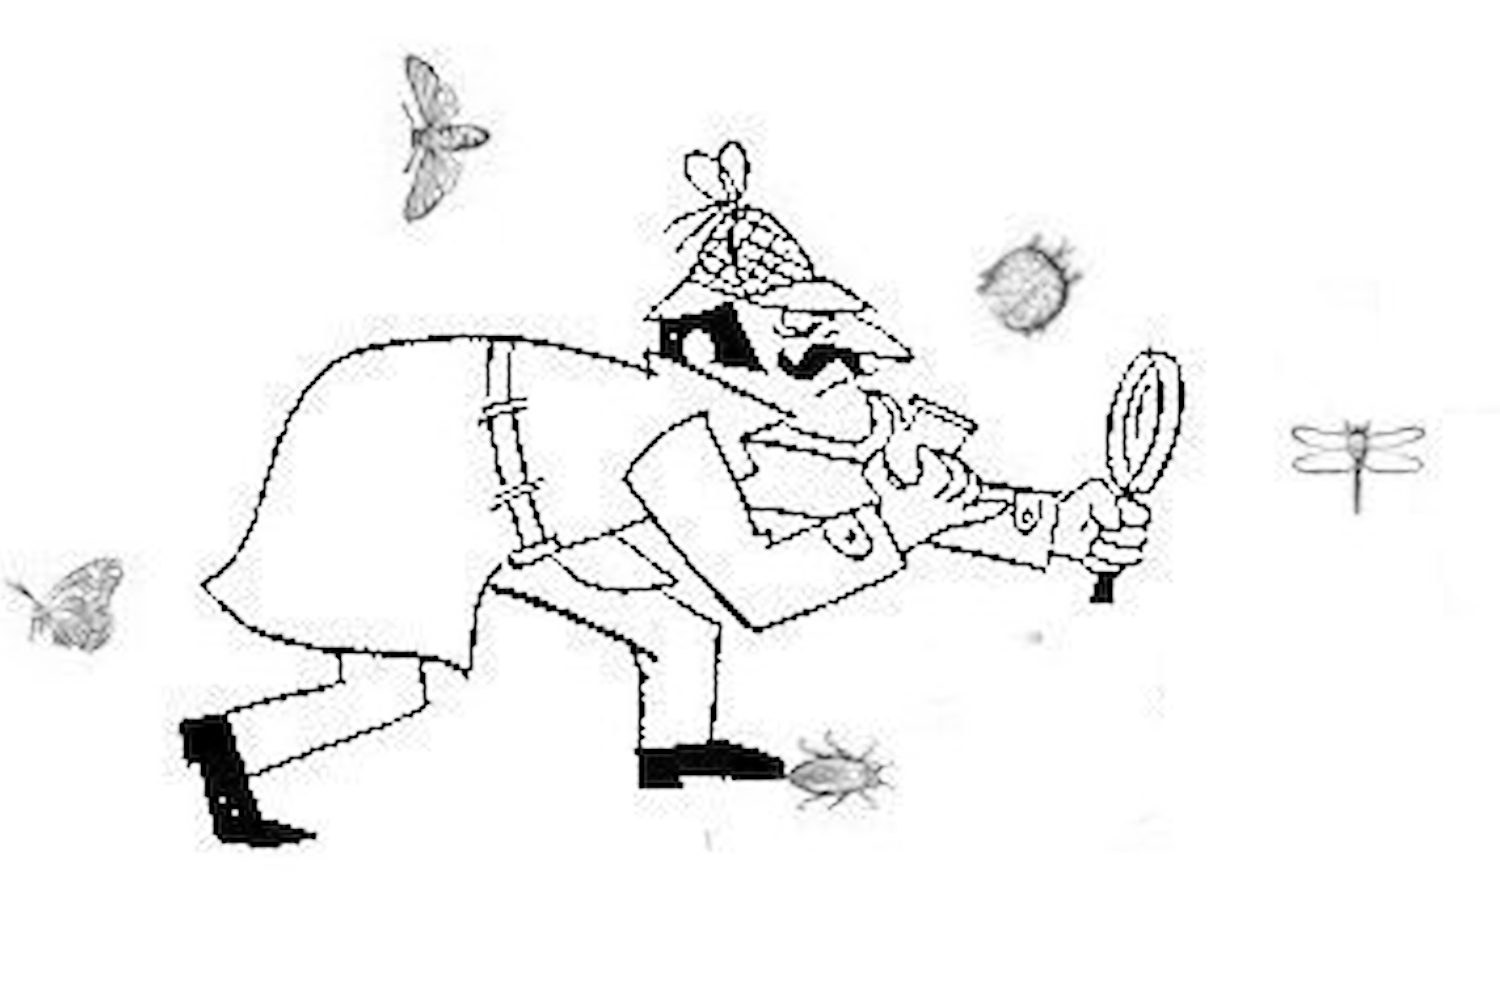 Cartoonish Sherlock Holmes-esque character holding a magnifying glass, with insects surrounding them